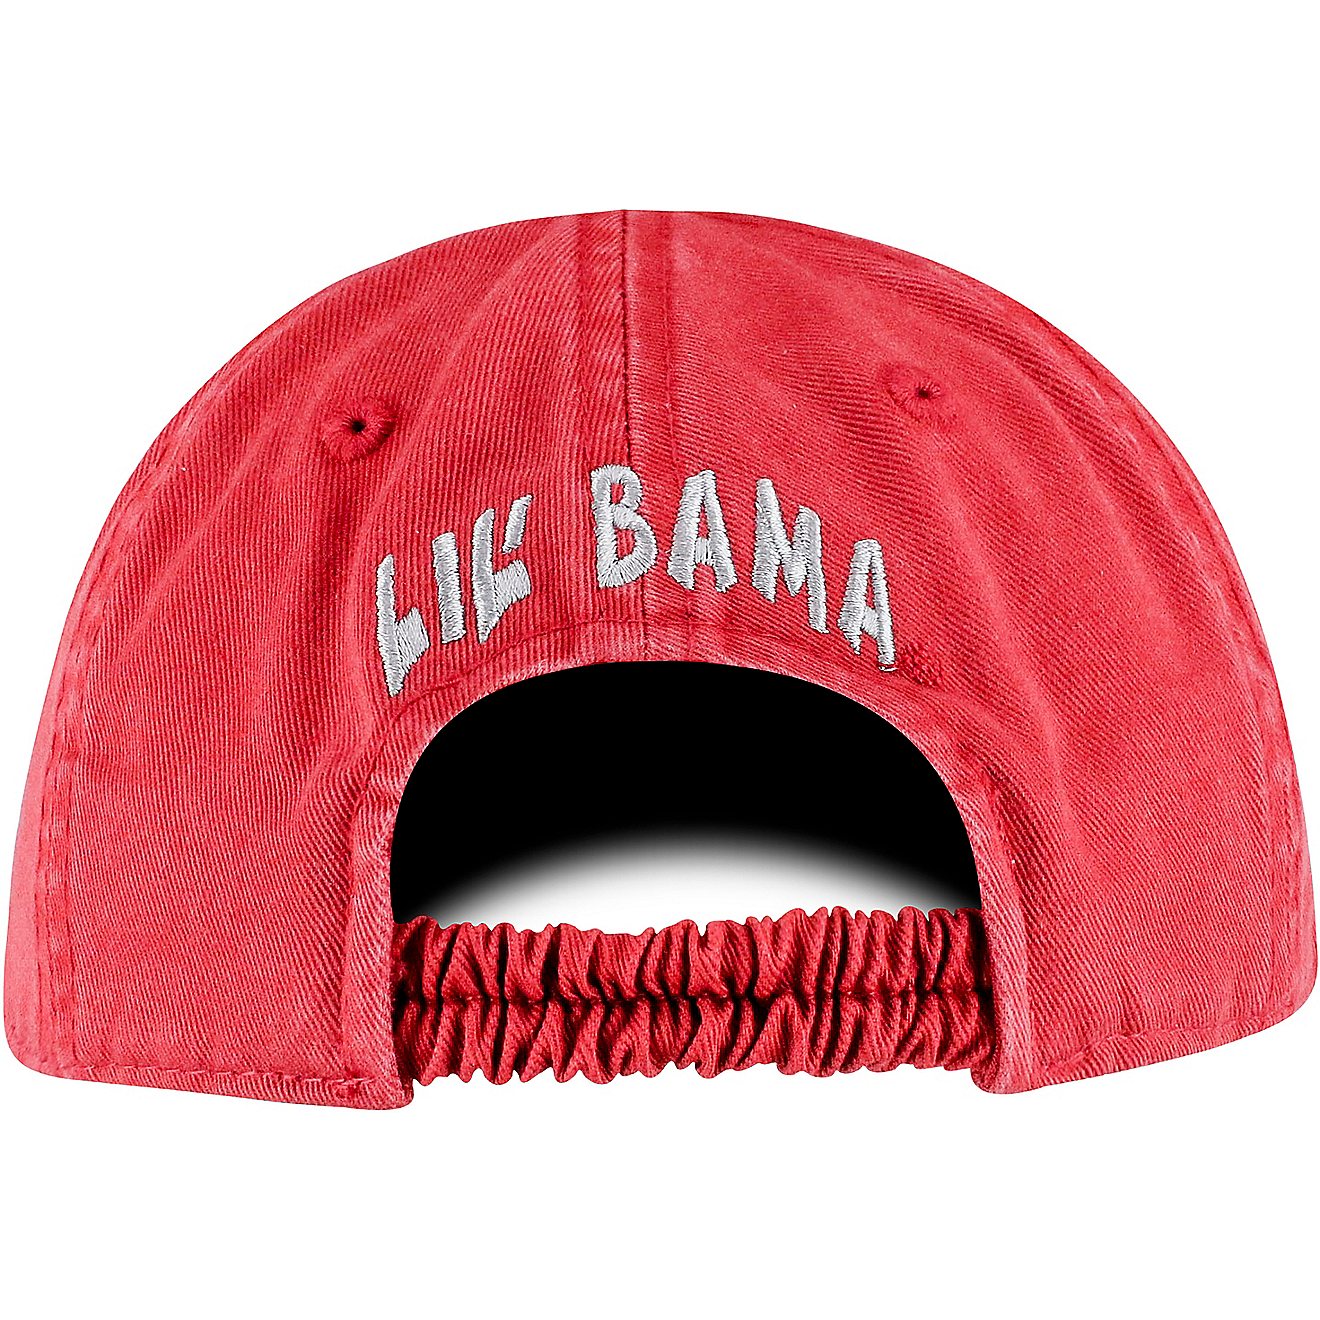 Top of the World Infants' University of Alabama Mini Me Adjustable Cap                                                           - view number 2